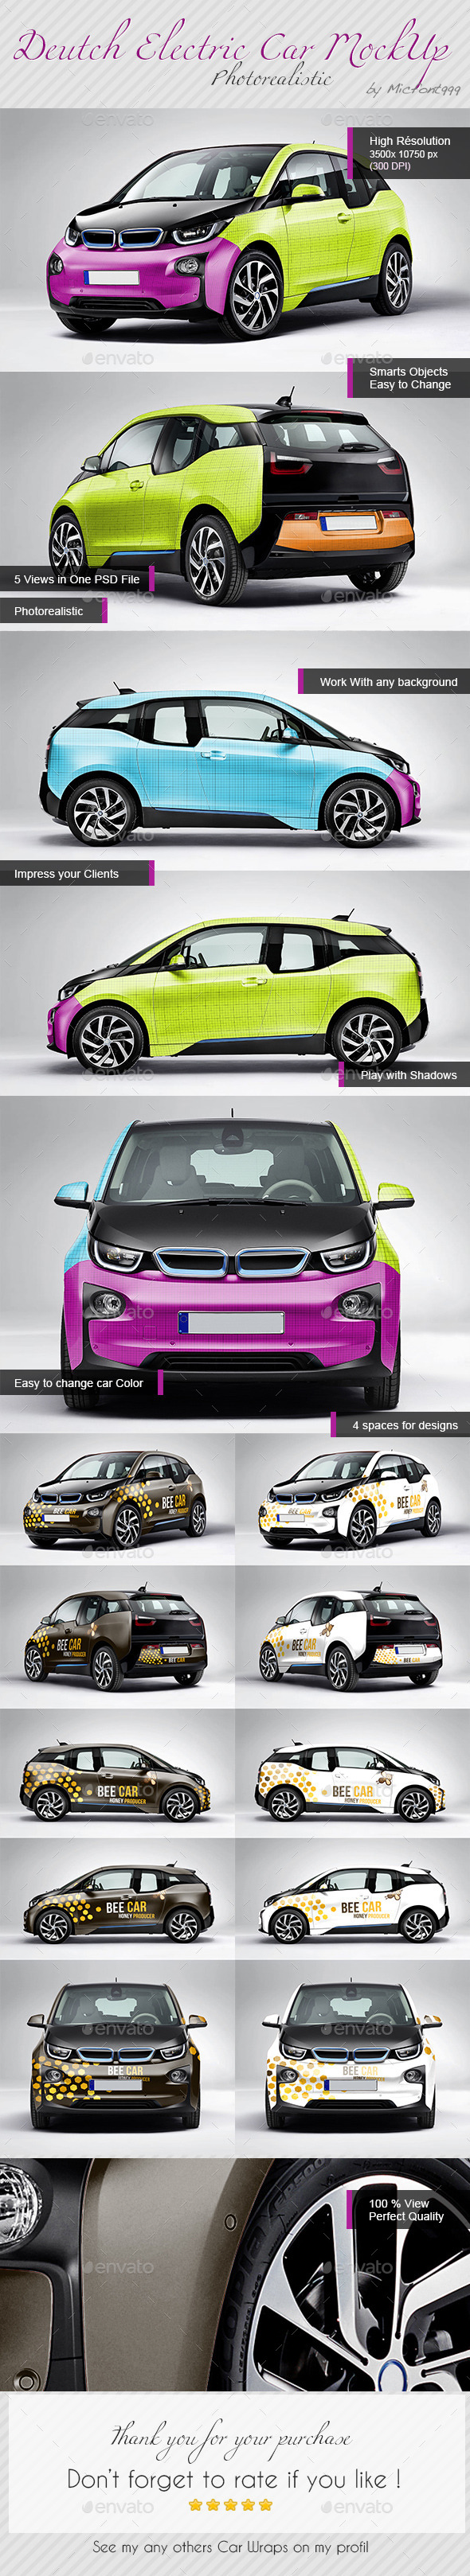 Download Car Mockup Graphics Designs Templates From Graphicriver PSD Mockup Templates